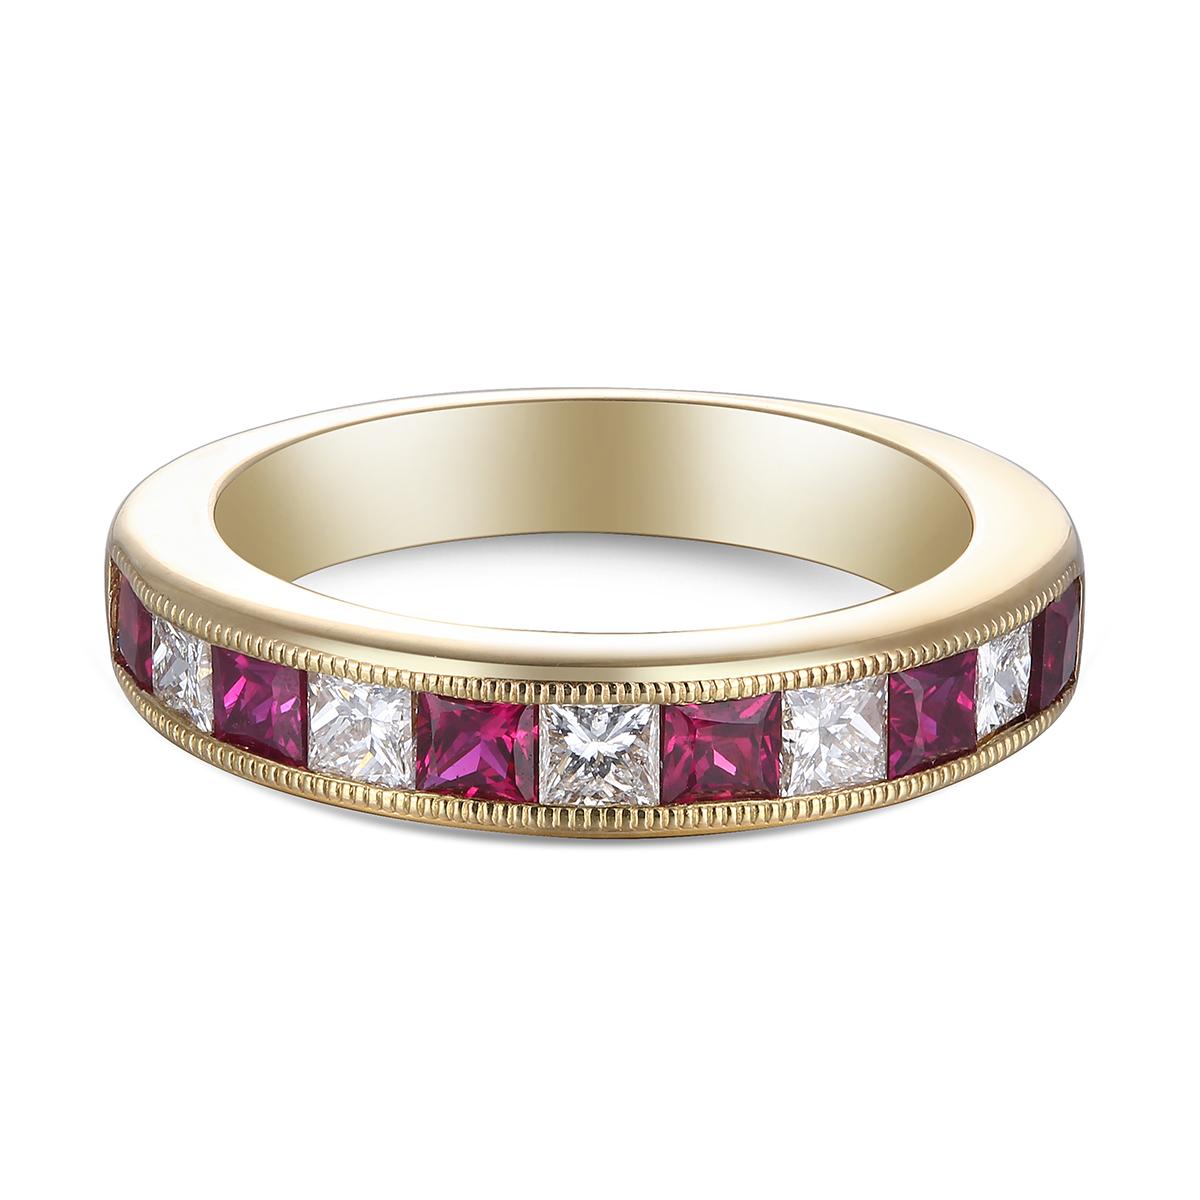 Stunning 18 Karat Yellow Gold, Diamond And Ruby Ring.

Diamonds of approximately 0.90 carats, rubies of approximately 1.20 carats and mounted on 18 karat yellow gold ring. The ring weighs approximately 6.51 grams.

Please note: The charges specified